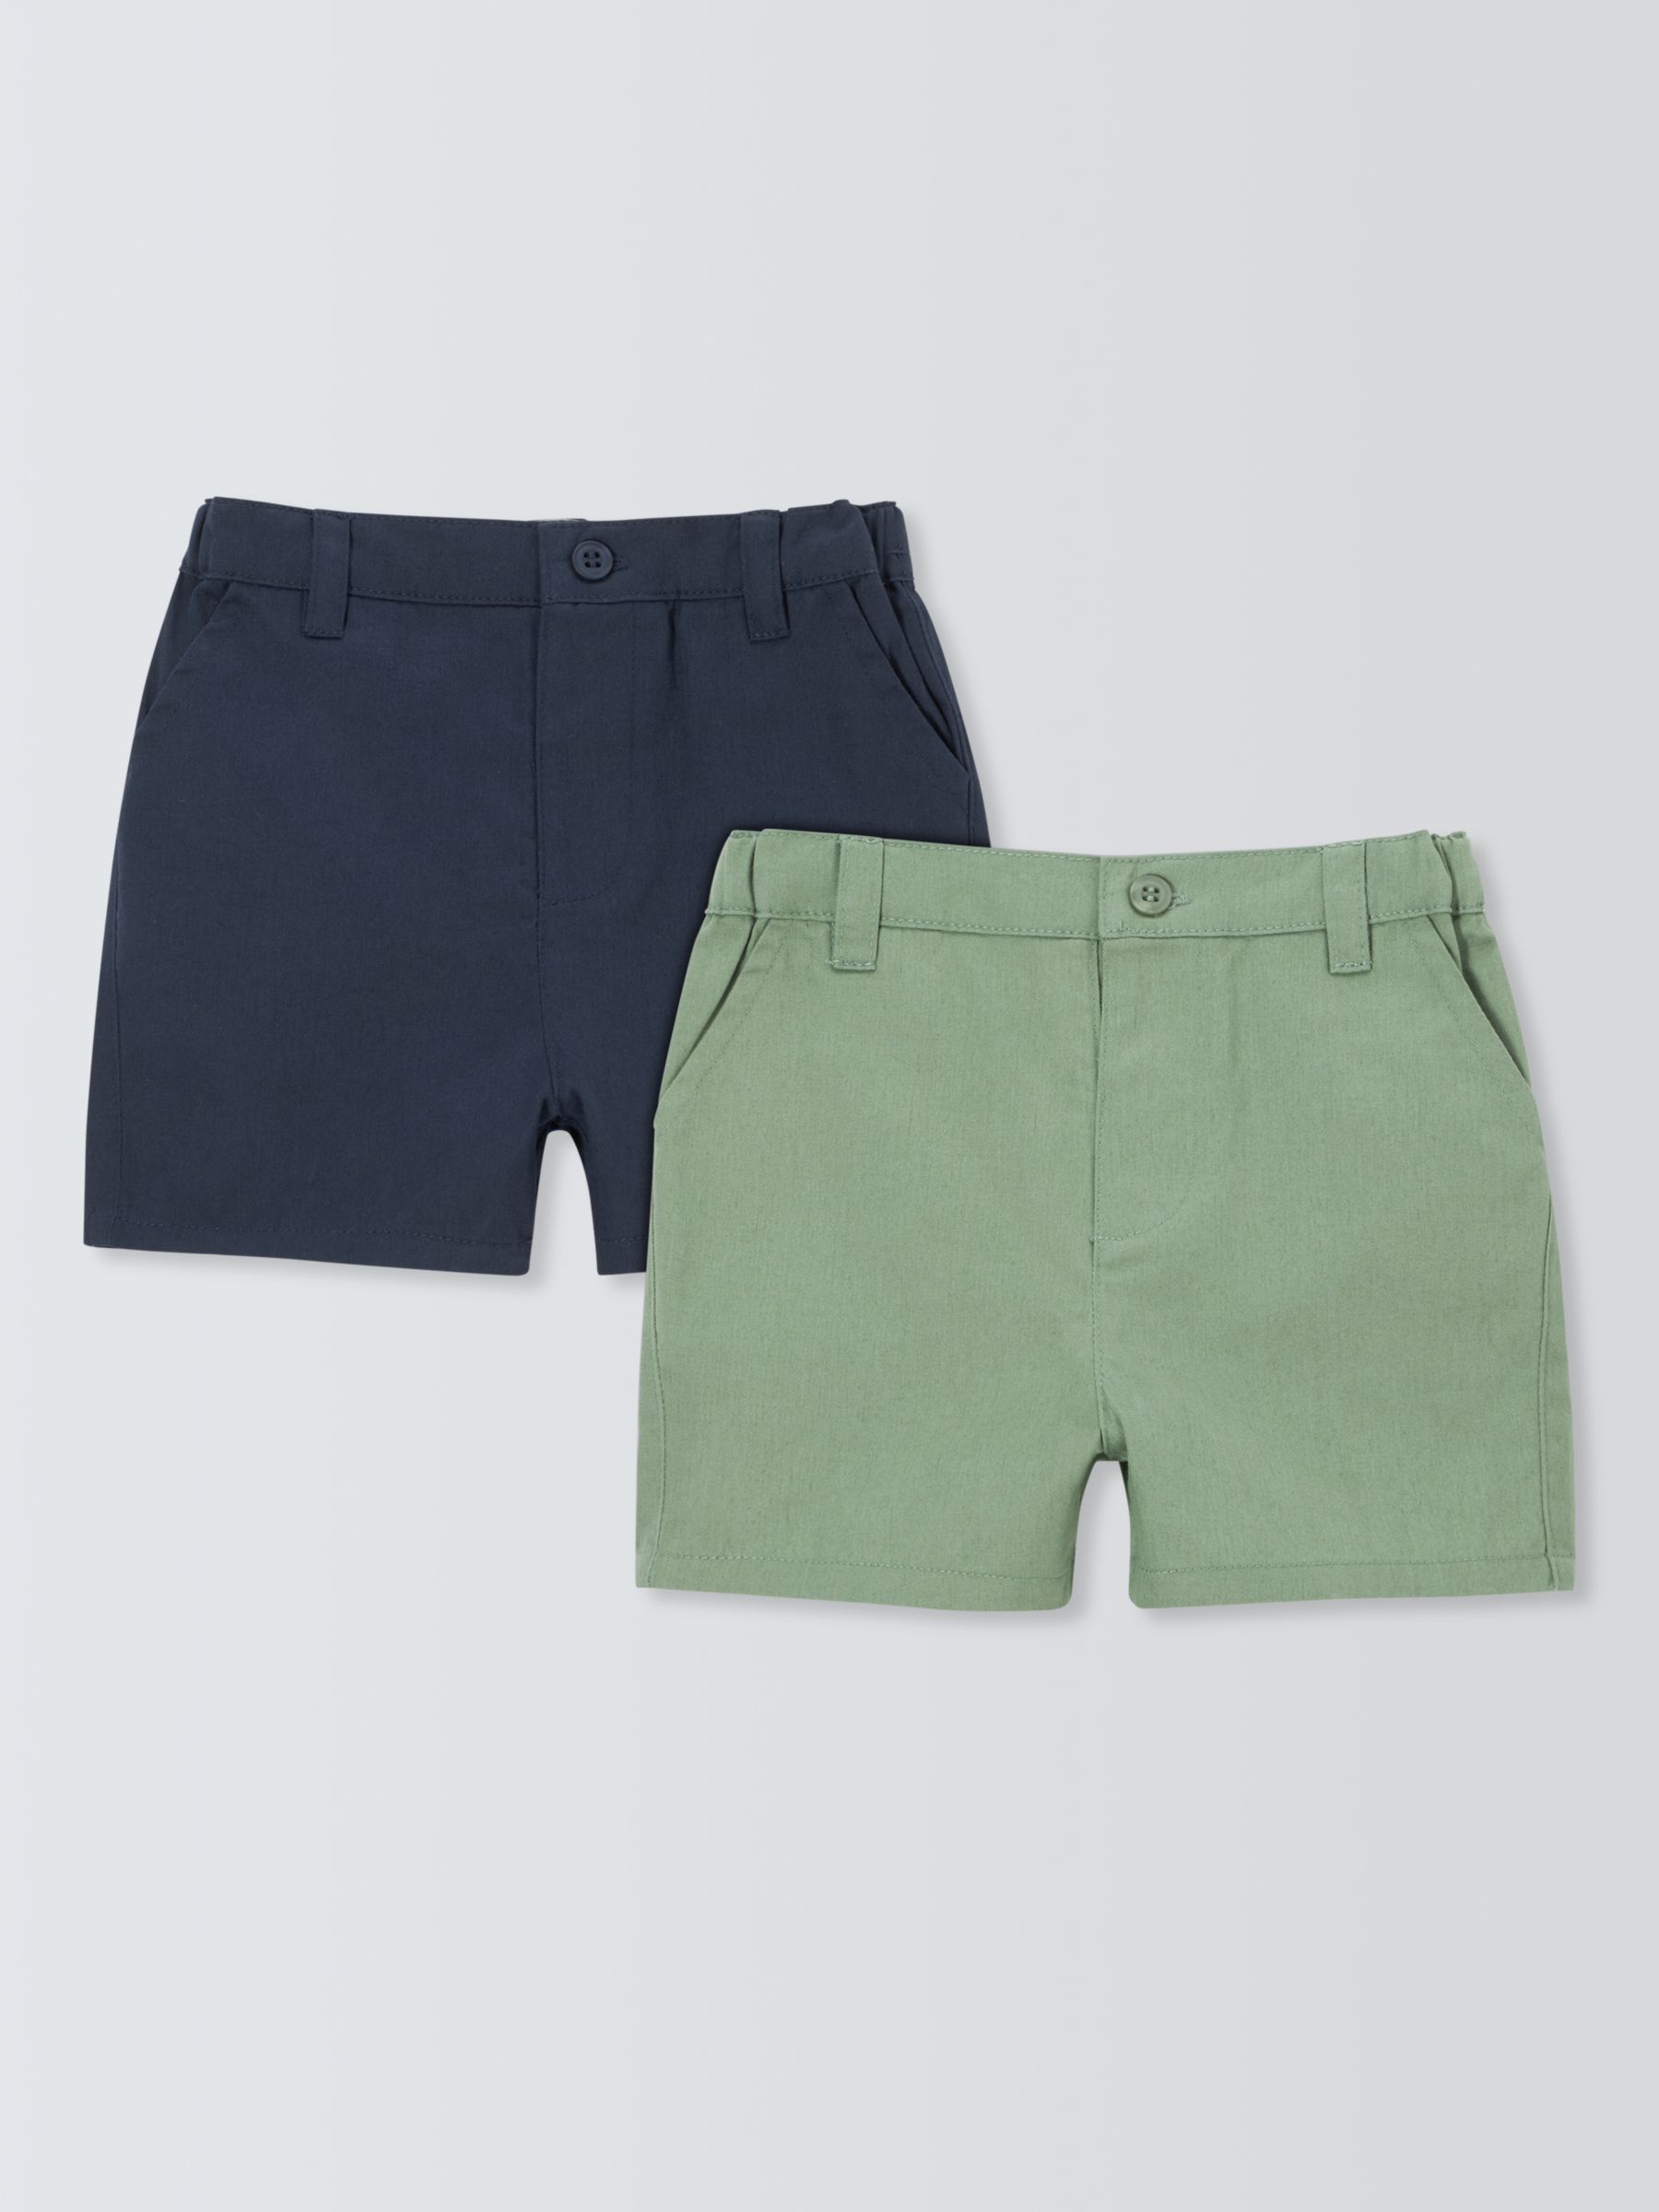 John Lewis Heirloom Collection Baby Chino Shorts, Pack of 2, Green/Navy, 6-9 months